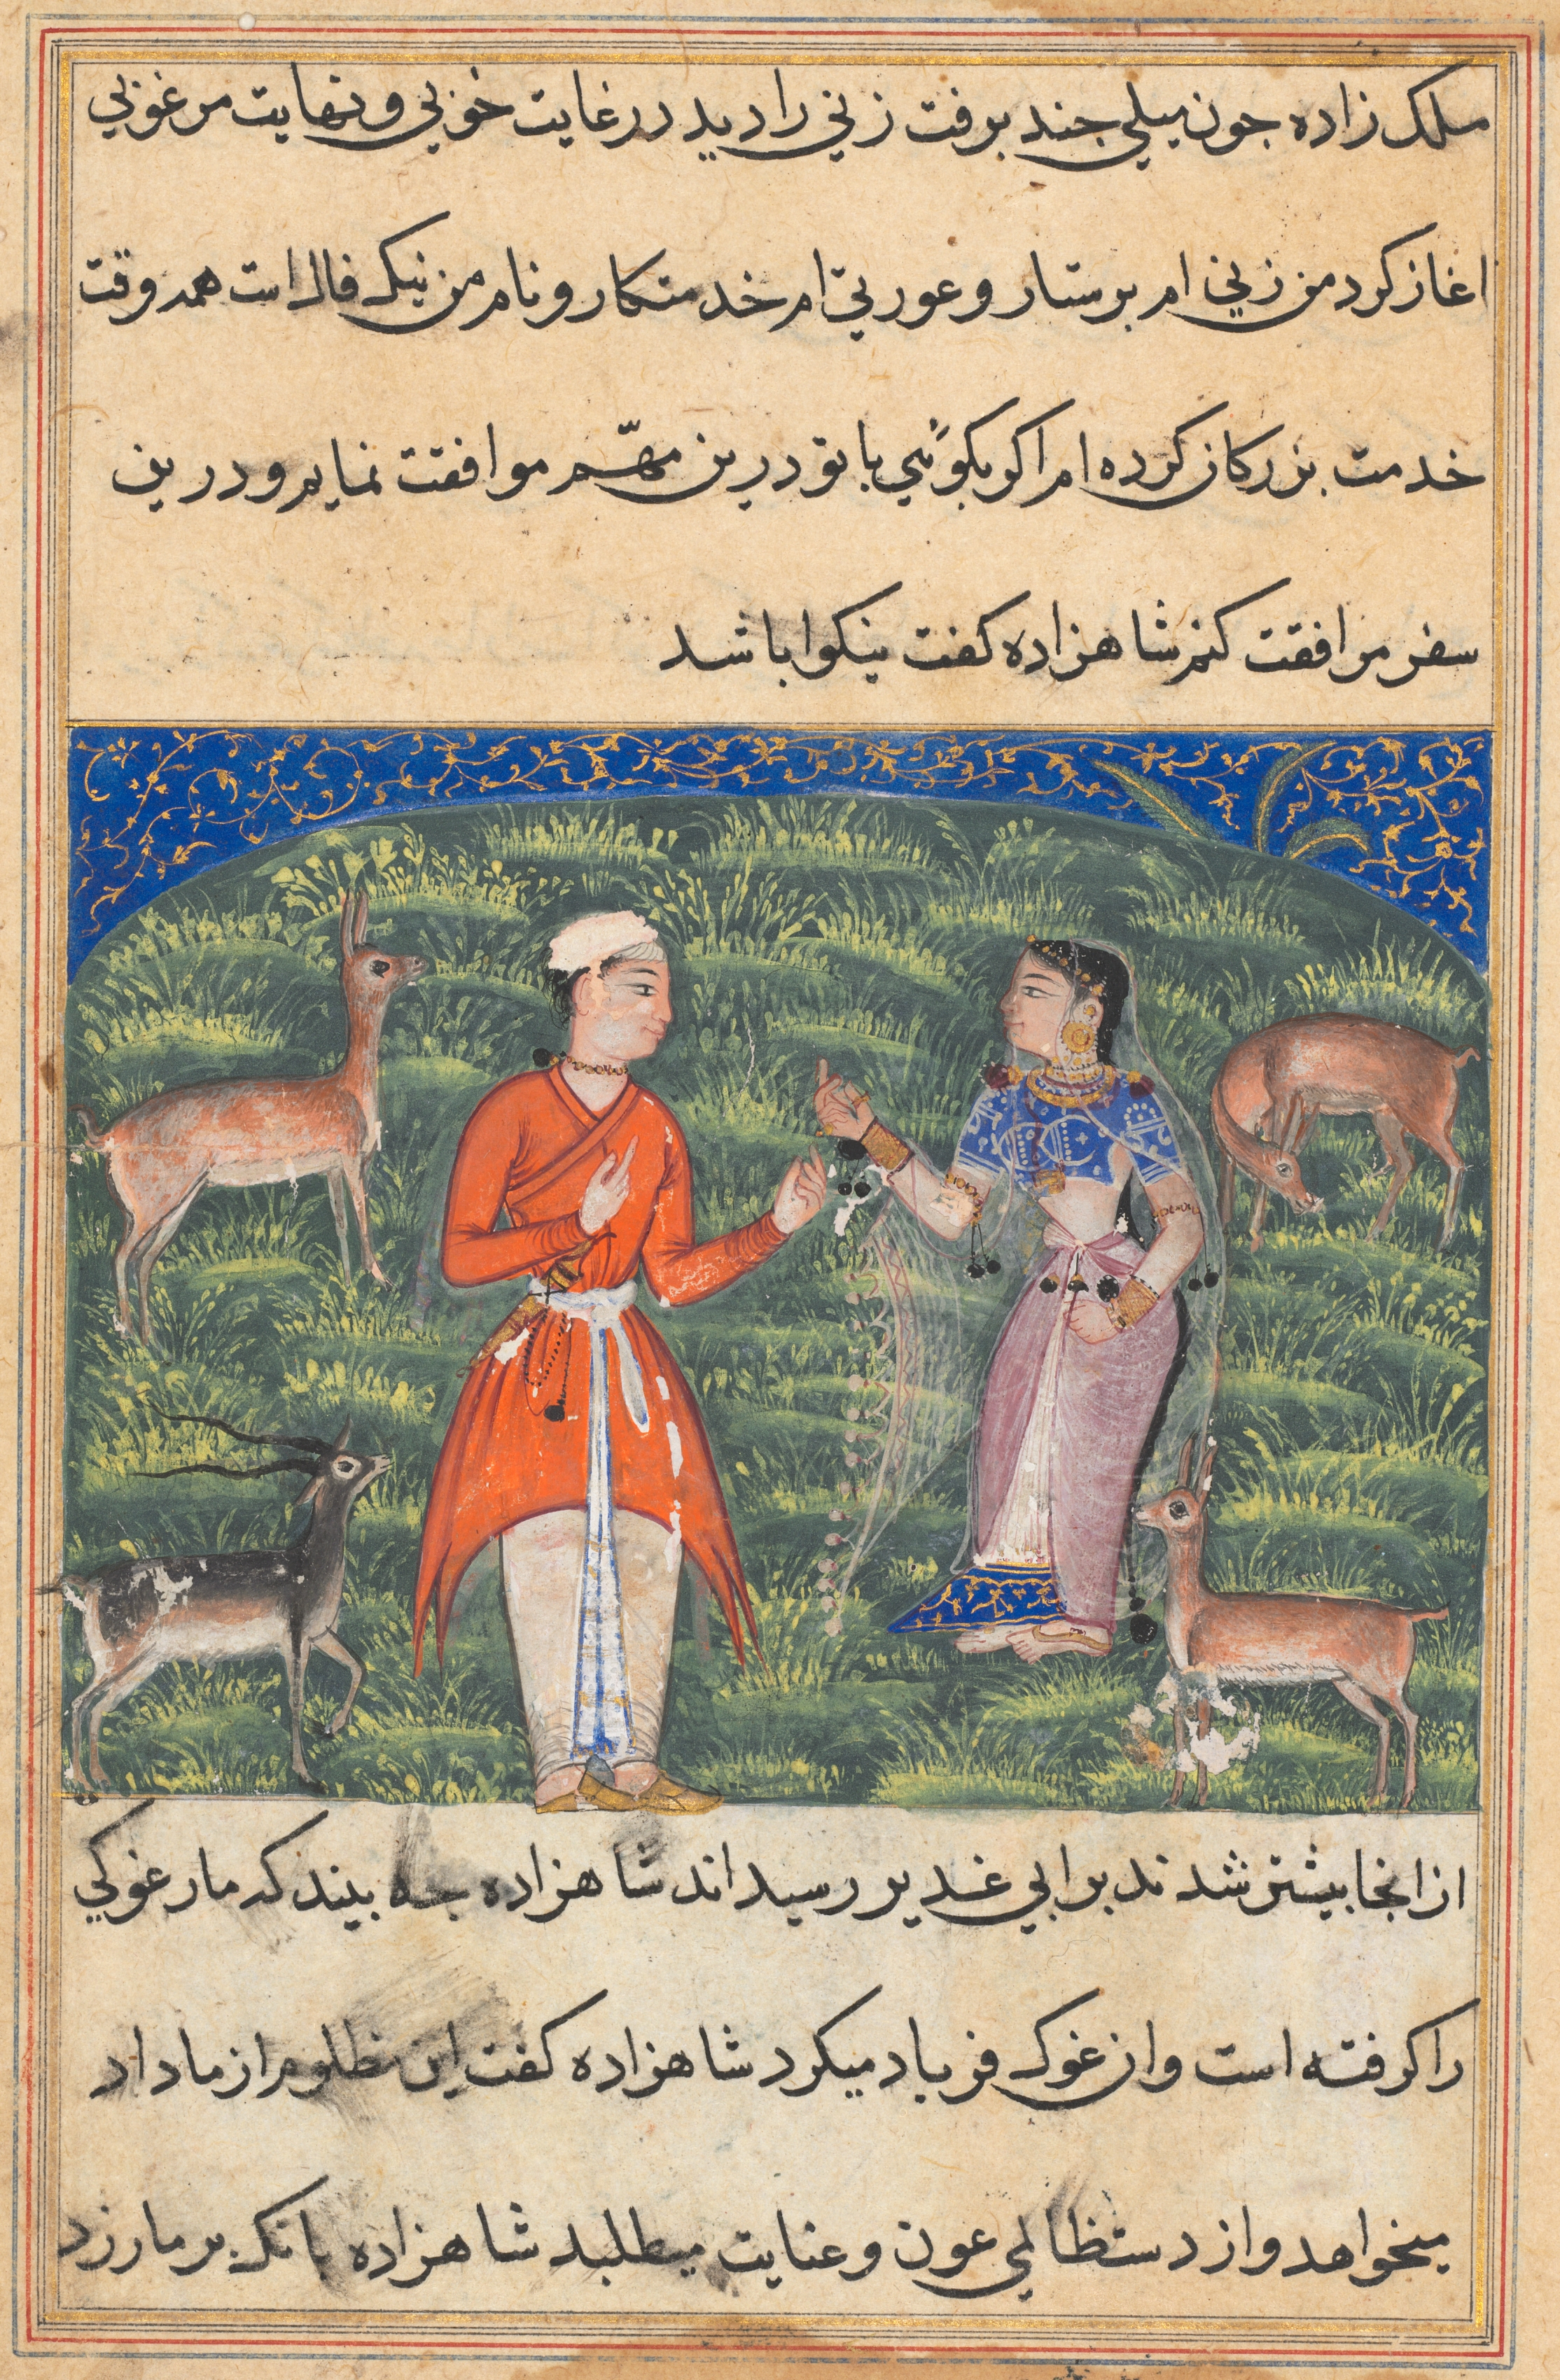 Nikfal, the fortune of the prince in the form of a woman, offers to accompany him, from a Tuti-nama (Tales of a Parrot): Eighteenth Night